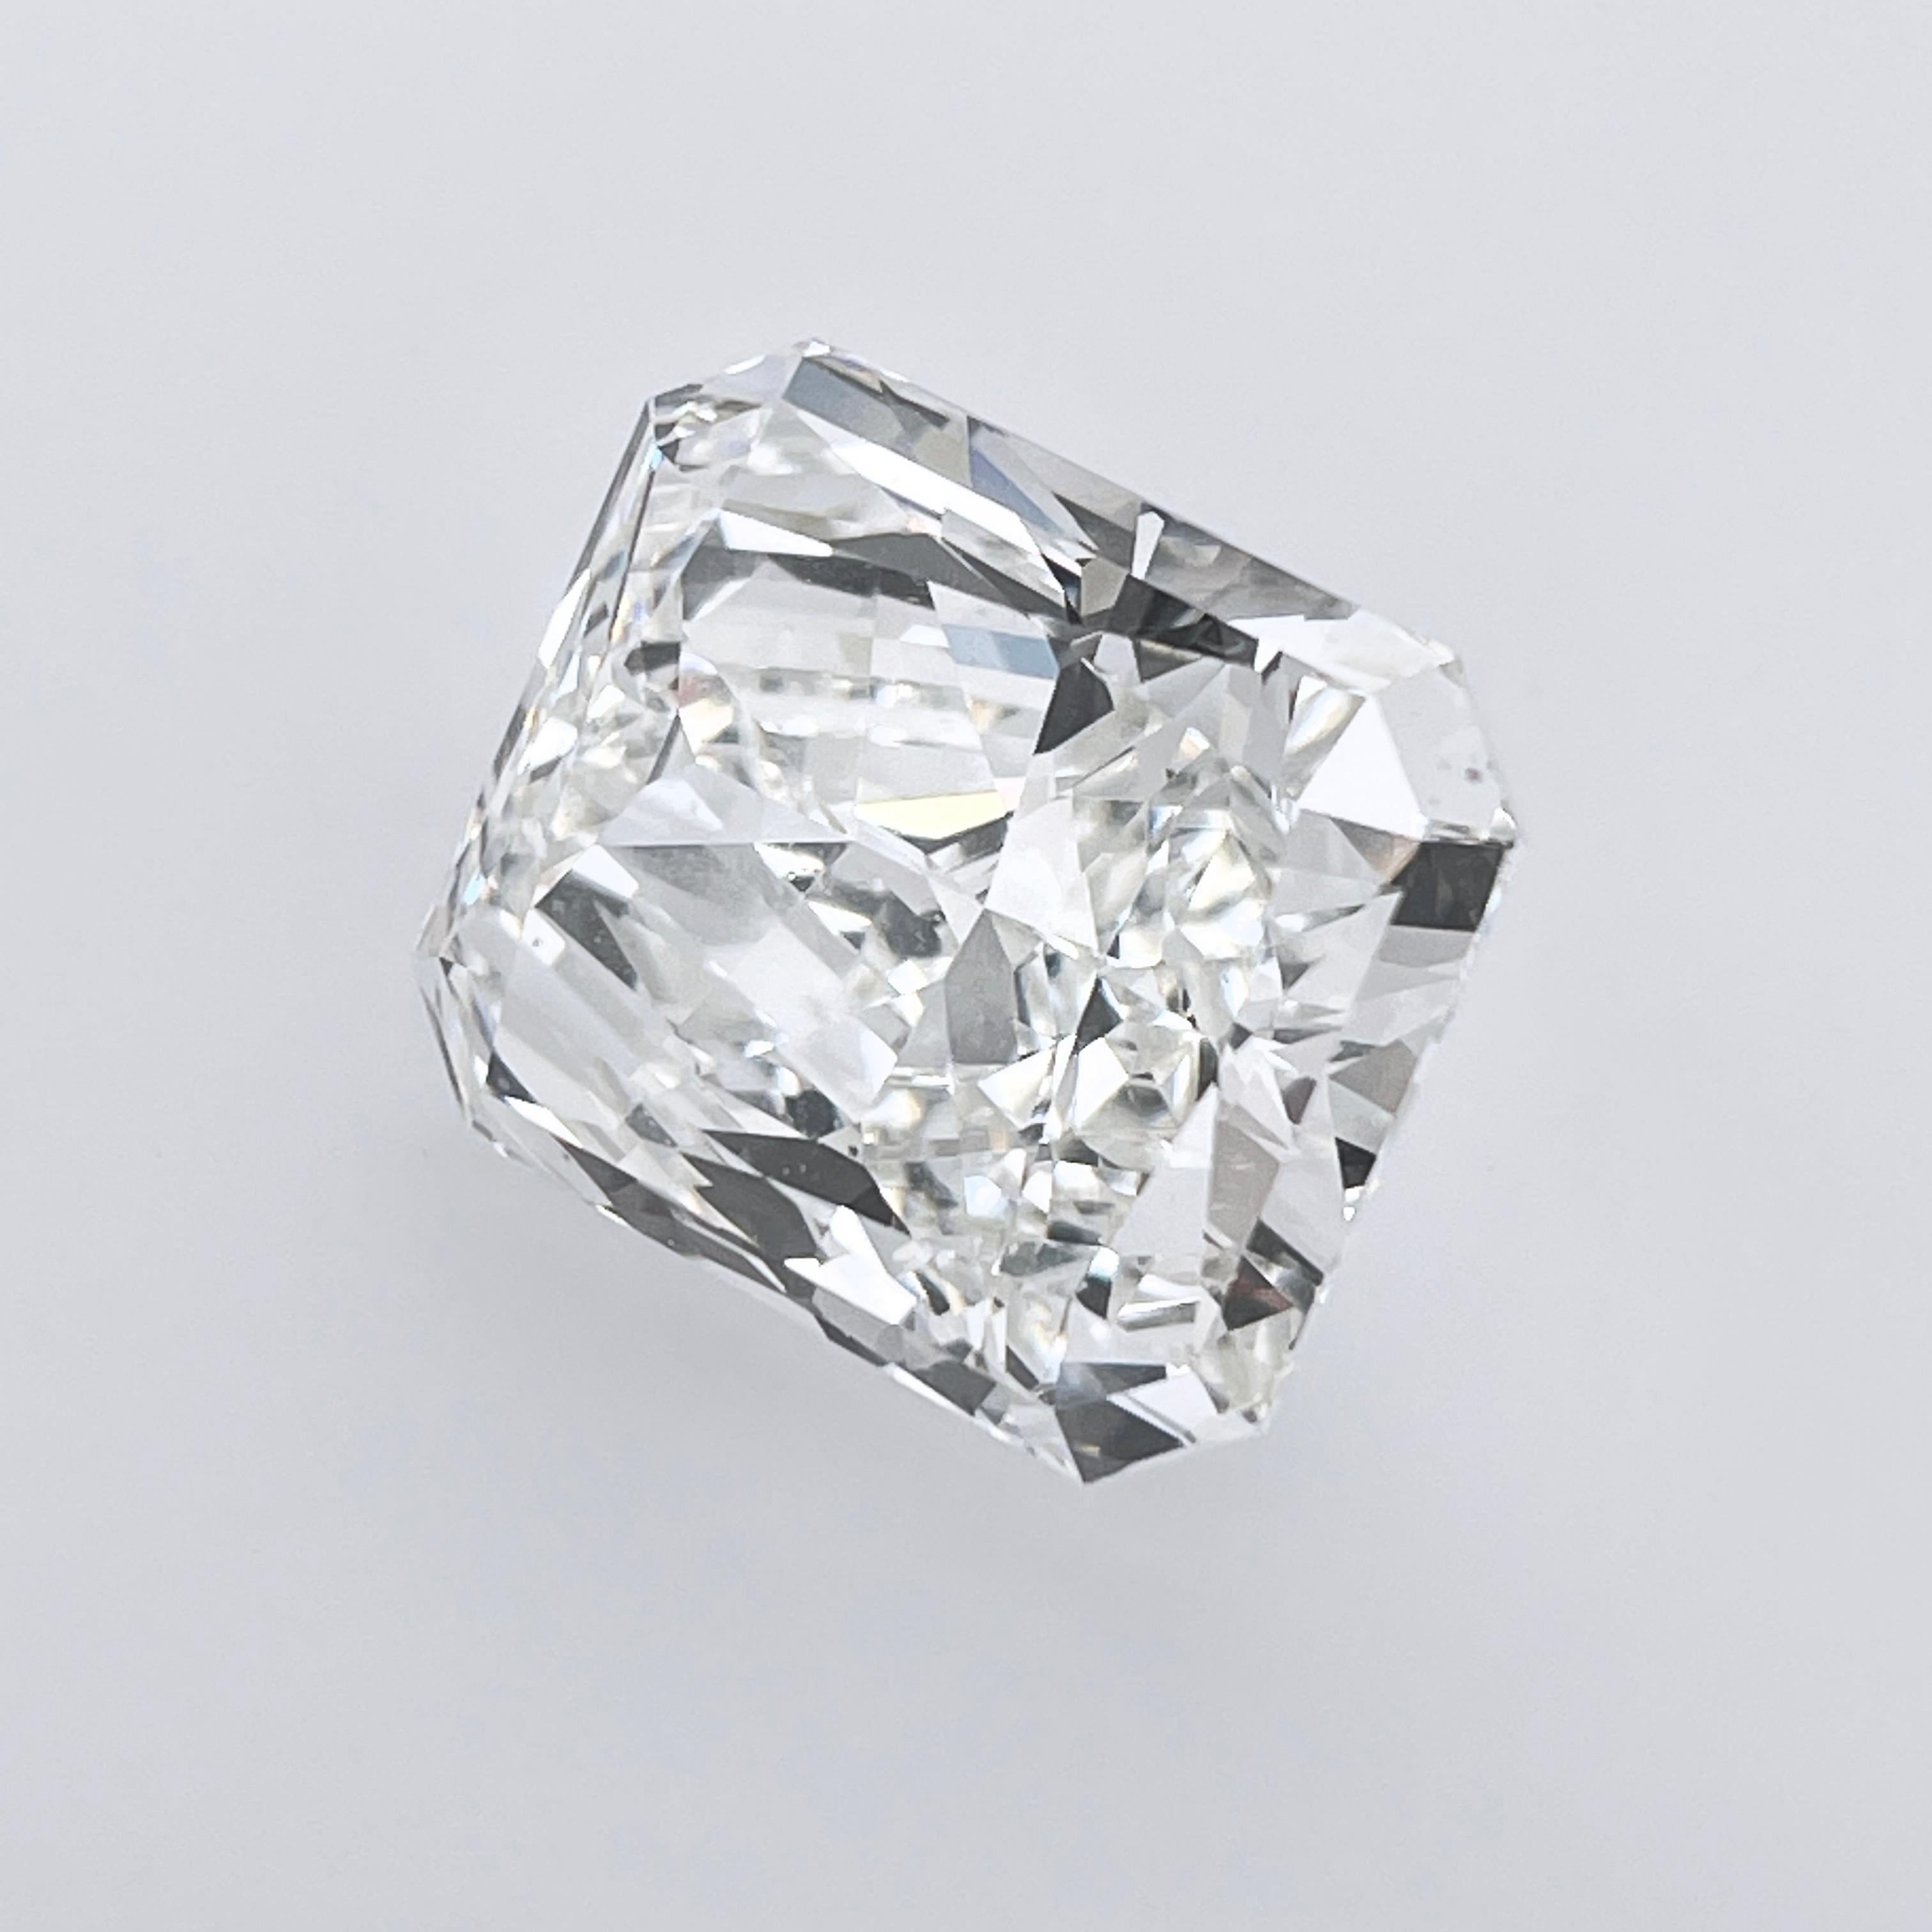 Radiant Cut Diamonds have a combination of the stylish lines of a square or rectangular shape with the brilliance of the traditional round brilliant cut. This Radiant Cut Diamond has cropped corners and is a combination of round and emerald cut